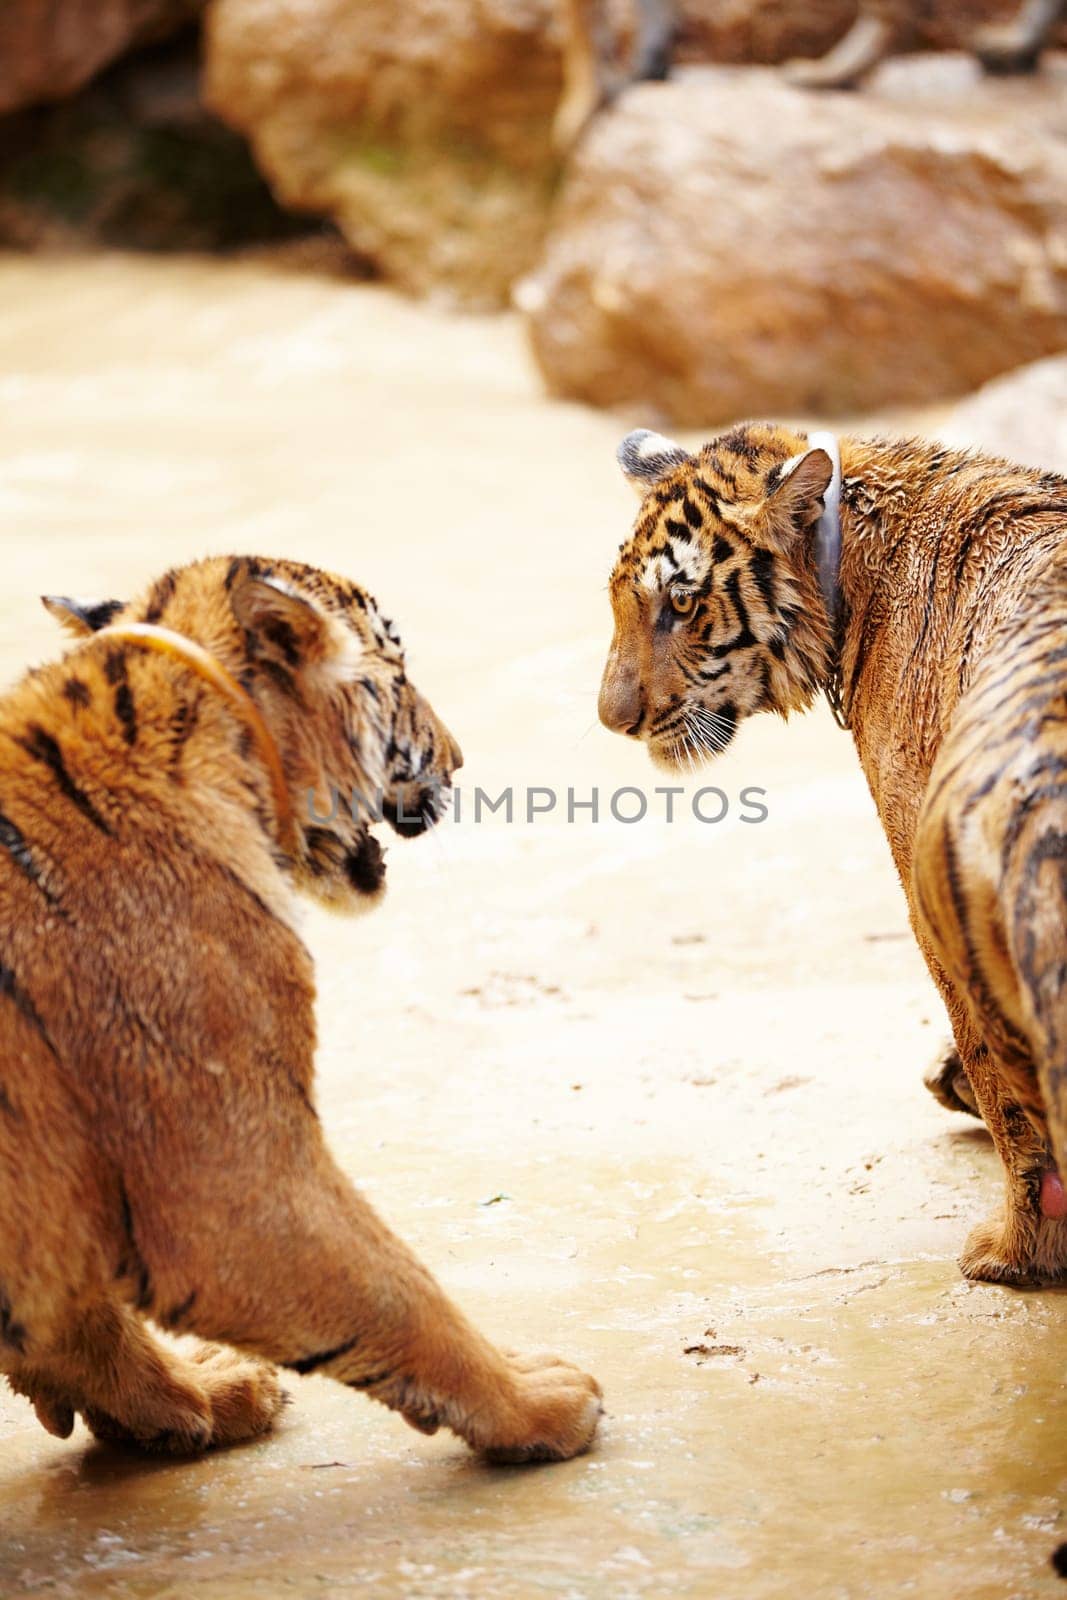 Nature, animals and tiger fight in zoo with playful cubs in mud with fun, endangered wildlife and water. Big cats playing together, park or river in Thailand for safari, outdoor action and power